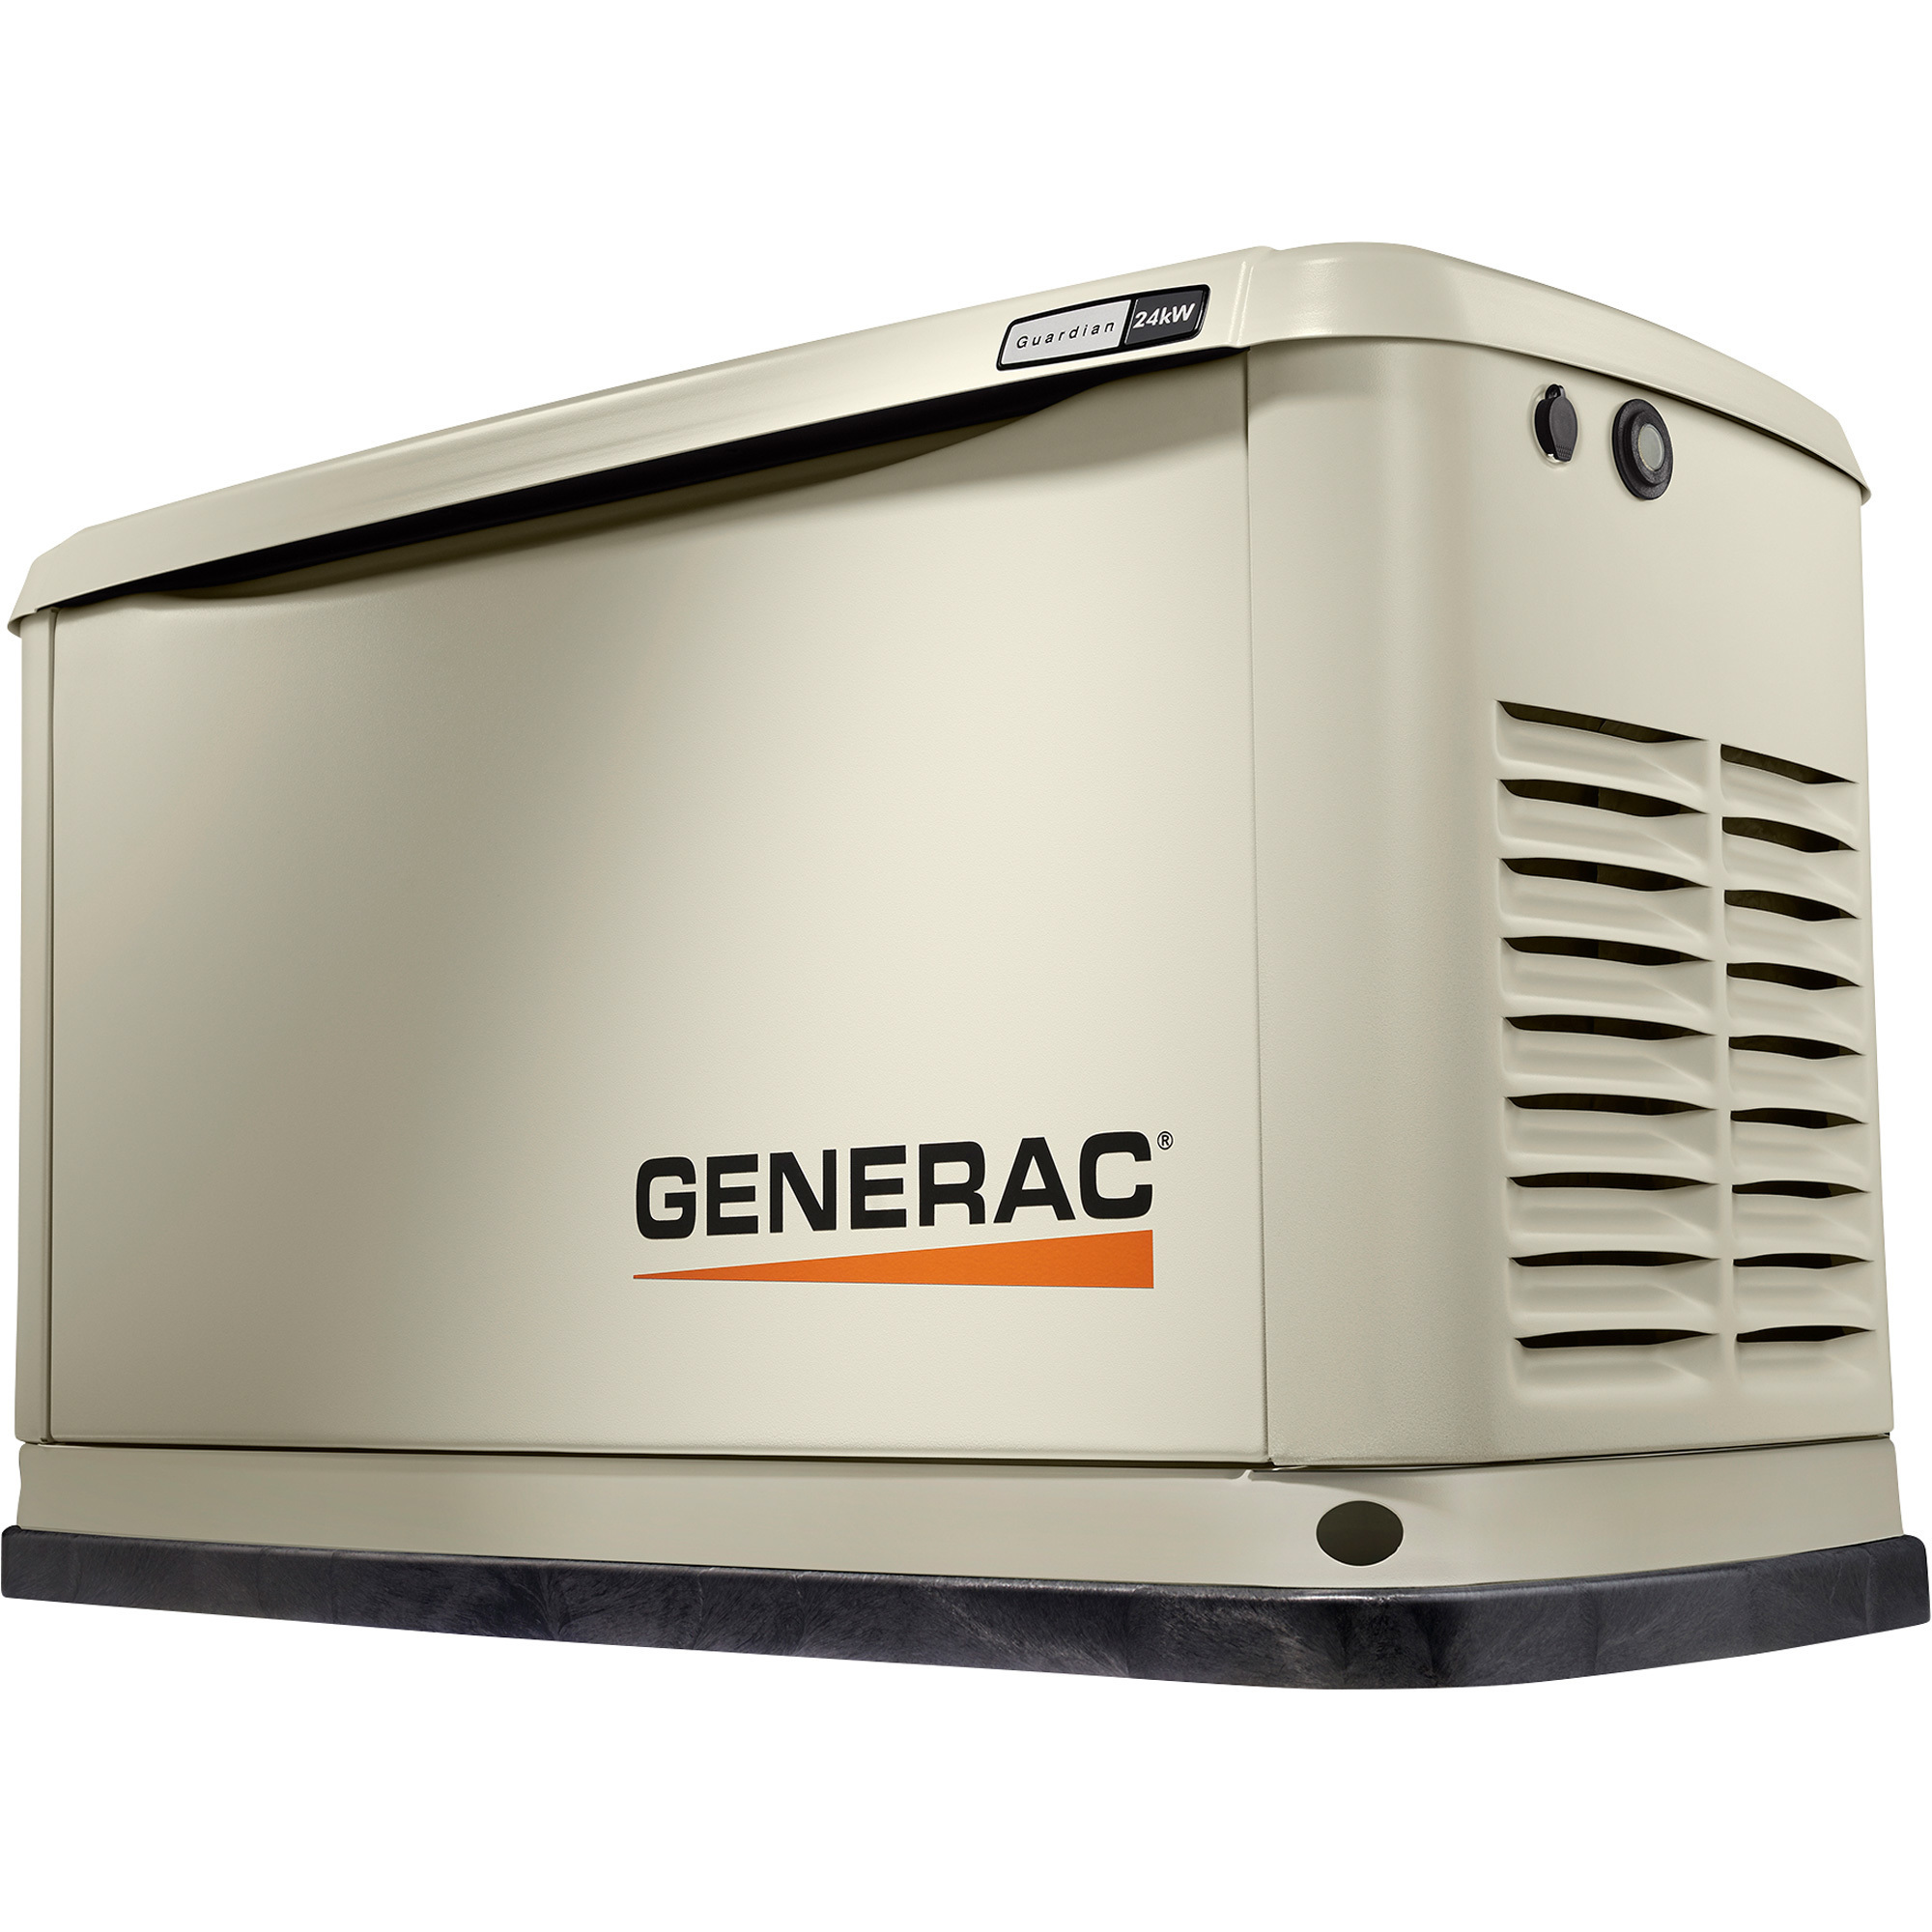 Generac 24kW (LP)/21kW (NG) Guardian Series Air-Cooled Home Standby Generator - Model 7209